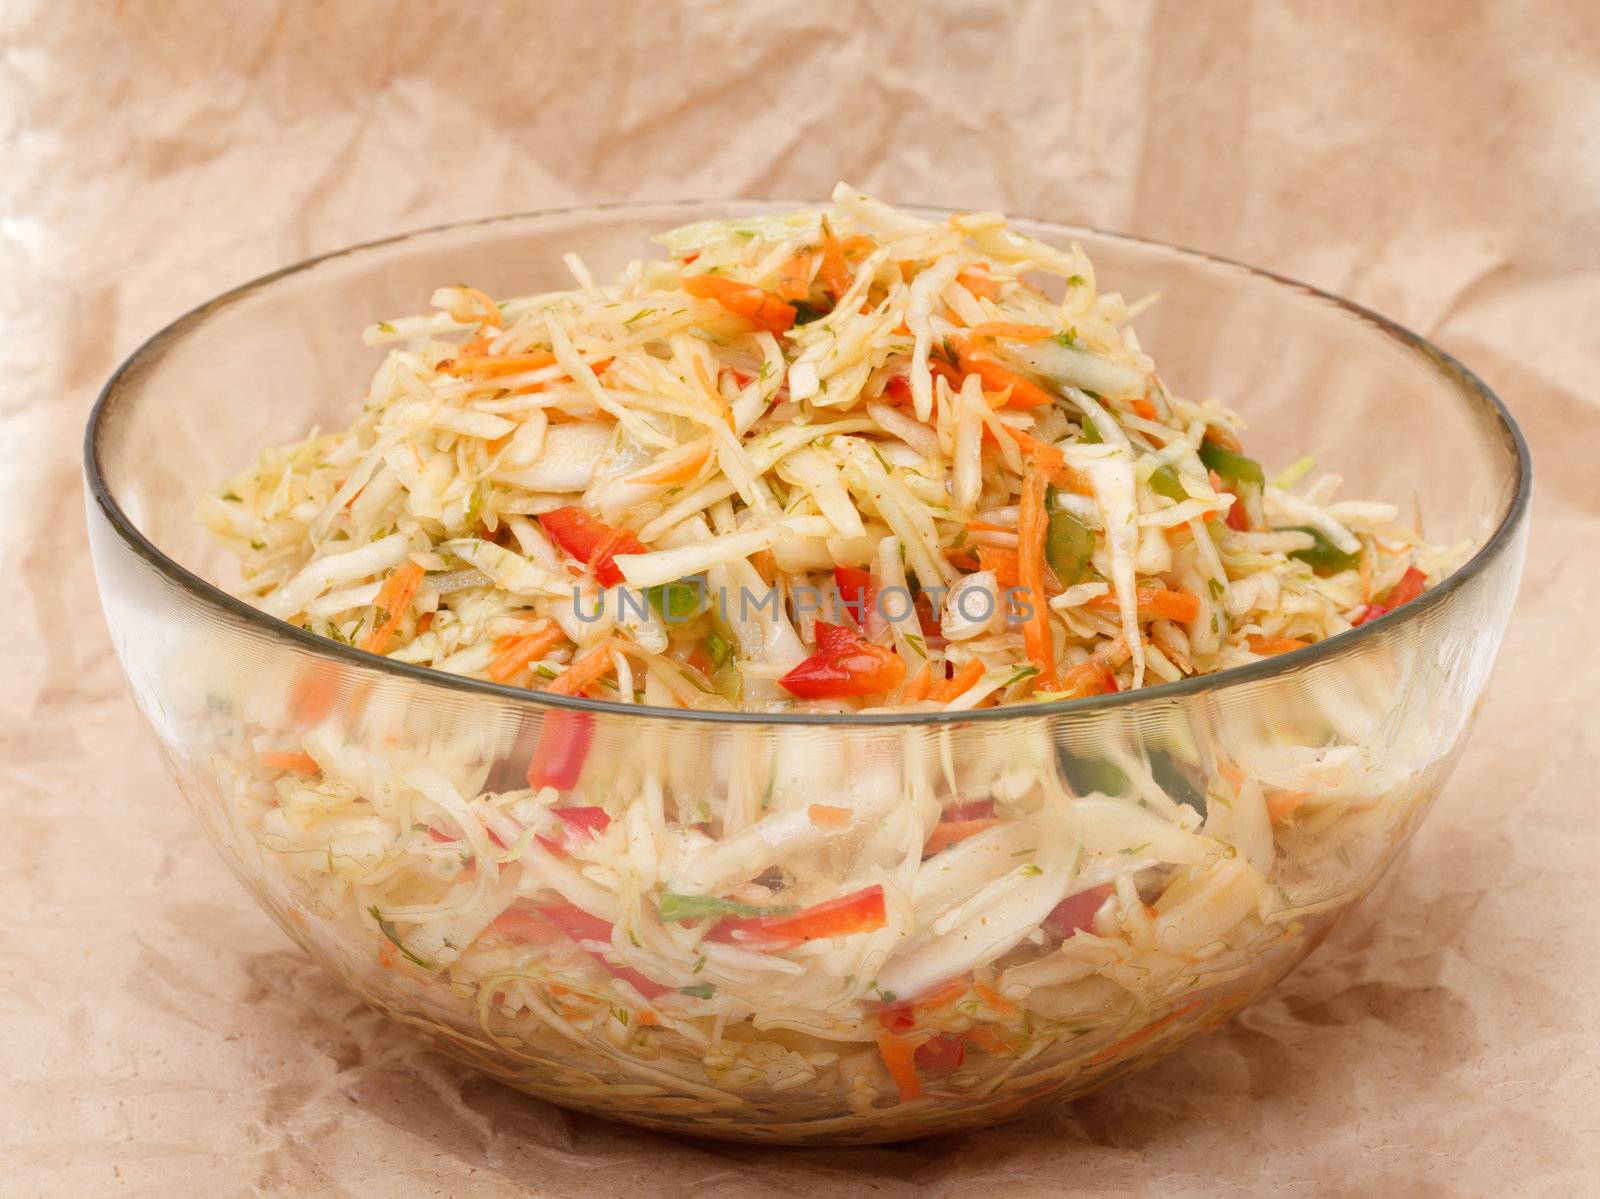 Coleslaw in glass bowl on brown crumpled recycled paper